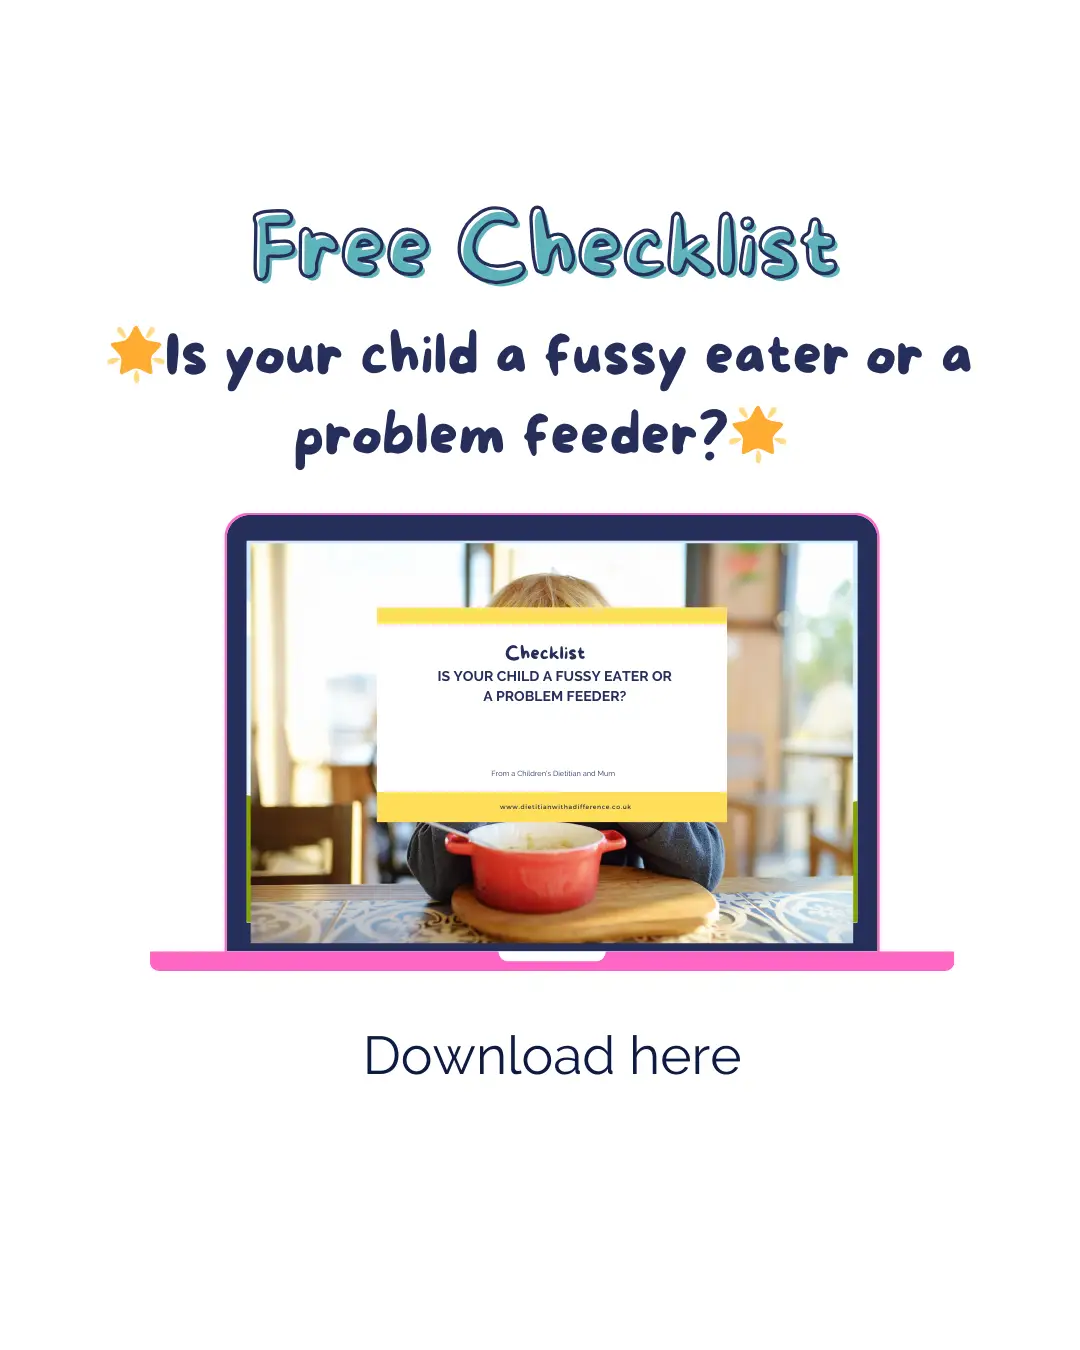 Free checklist is your child a fussy eater or problem eater?